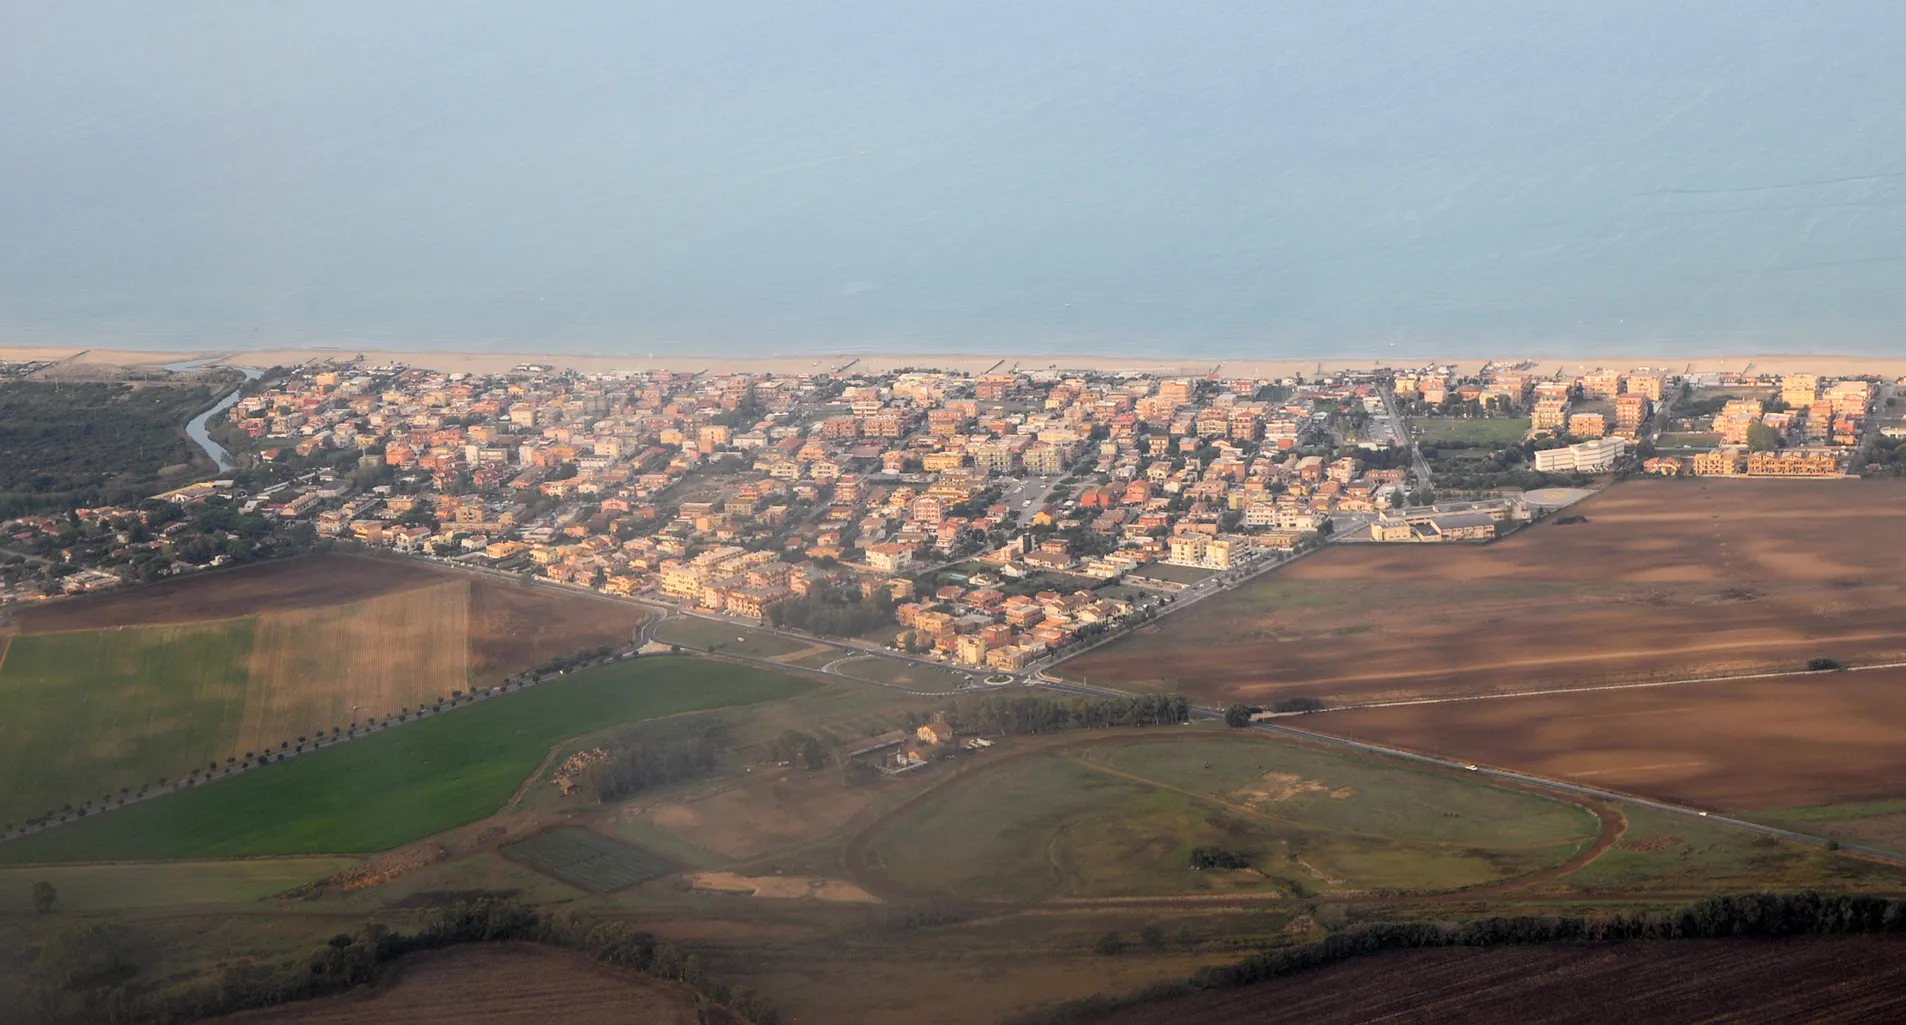 Photo showing: Aerial view of the coastal town of Passo Oscuro, located about 20 km west of Rome. The Tyrrhenian Sea is seen in the background.